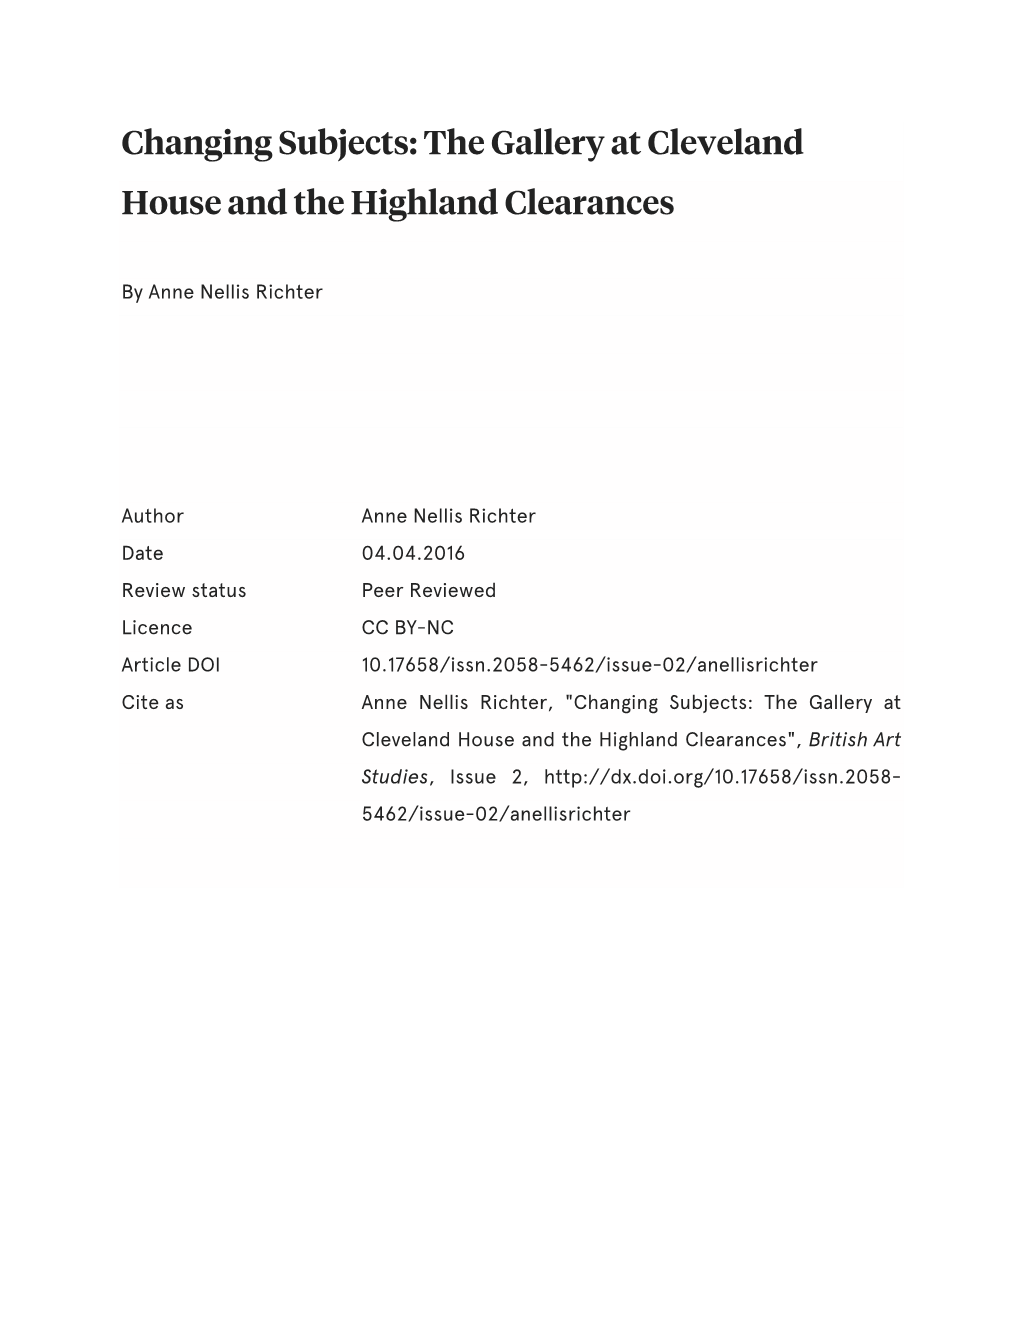 Changing Subjects: the Gallery at Cleveland House and the Highland Clearances